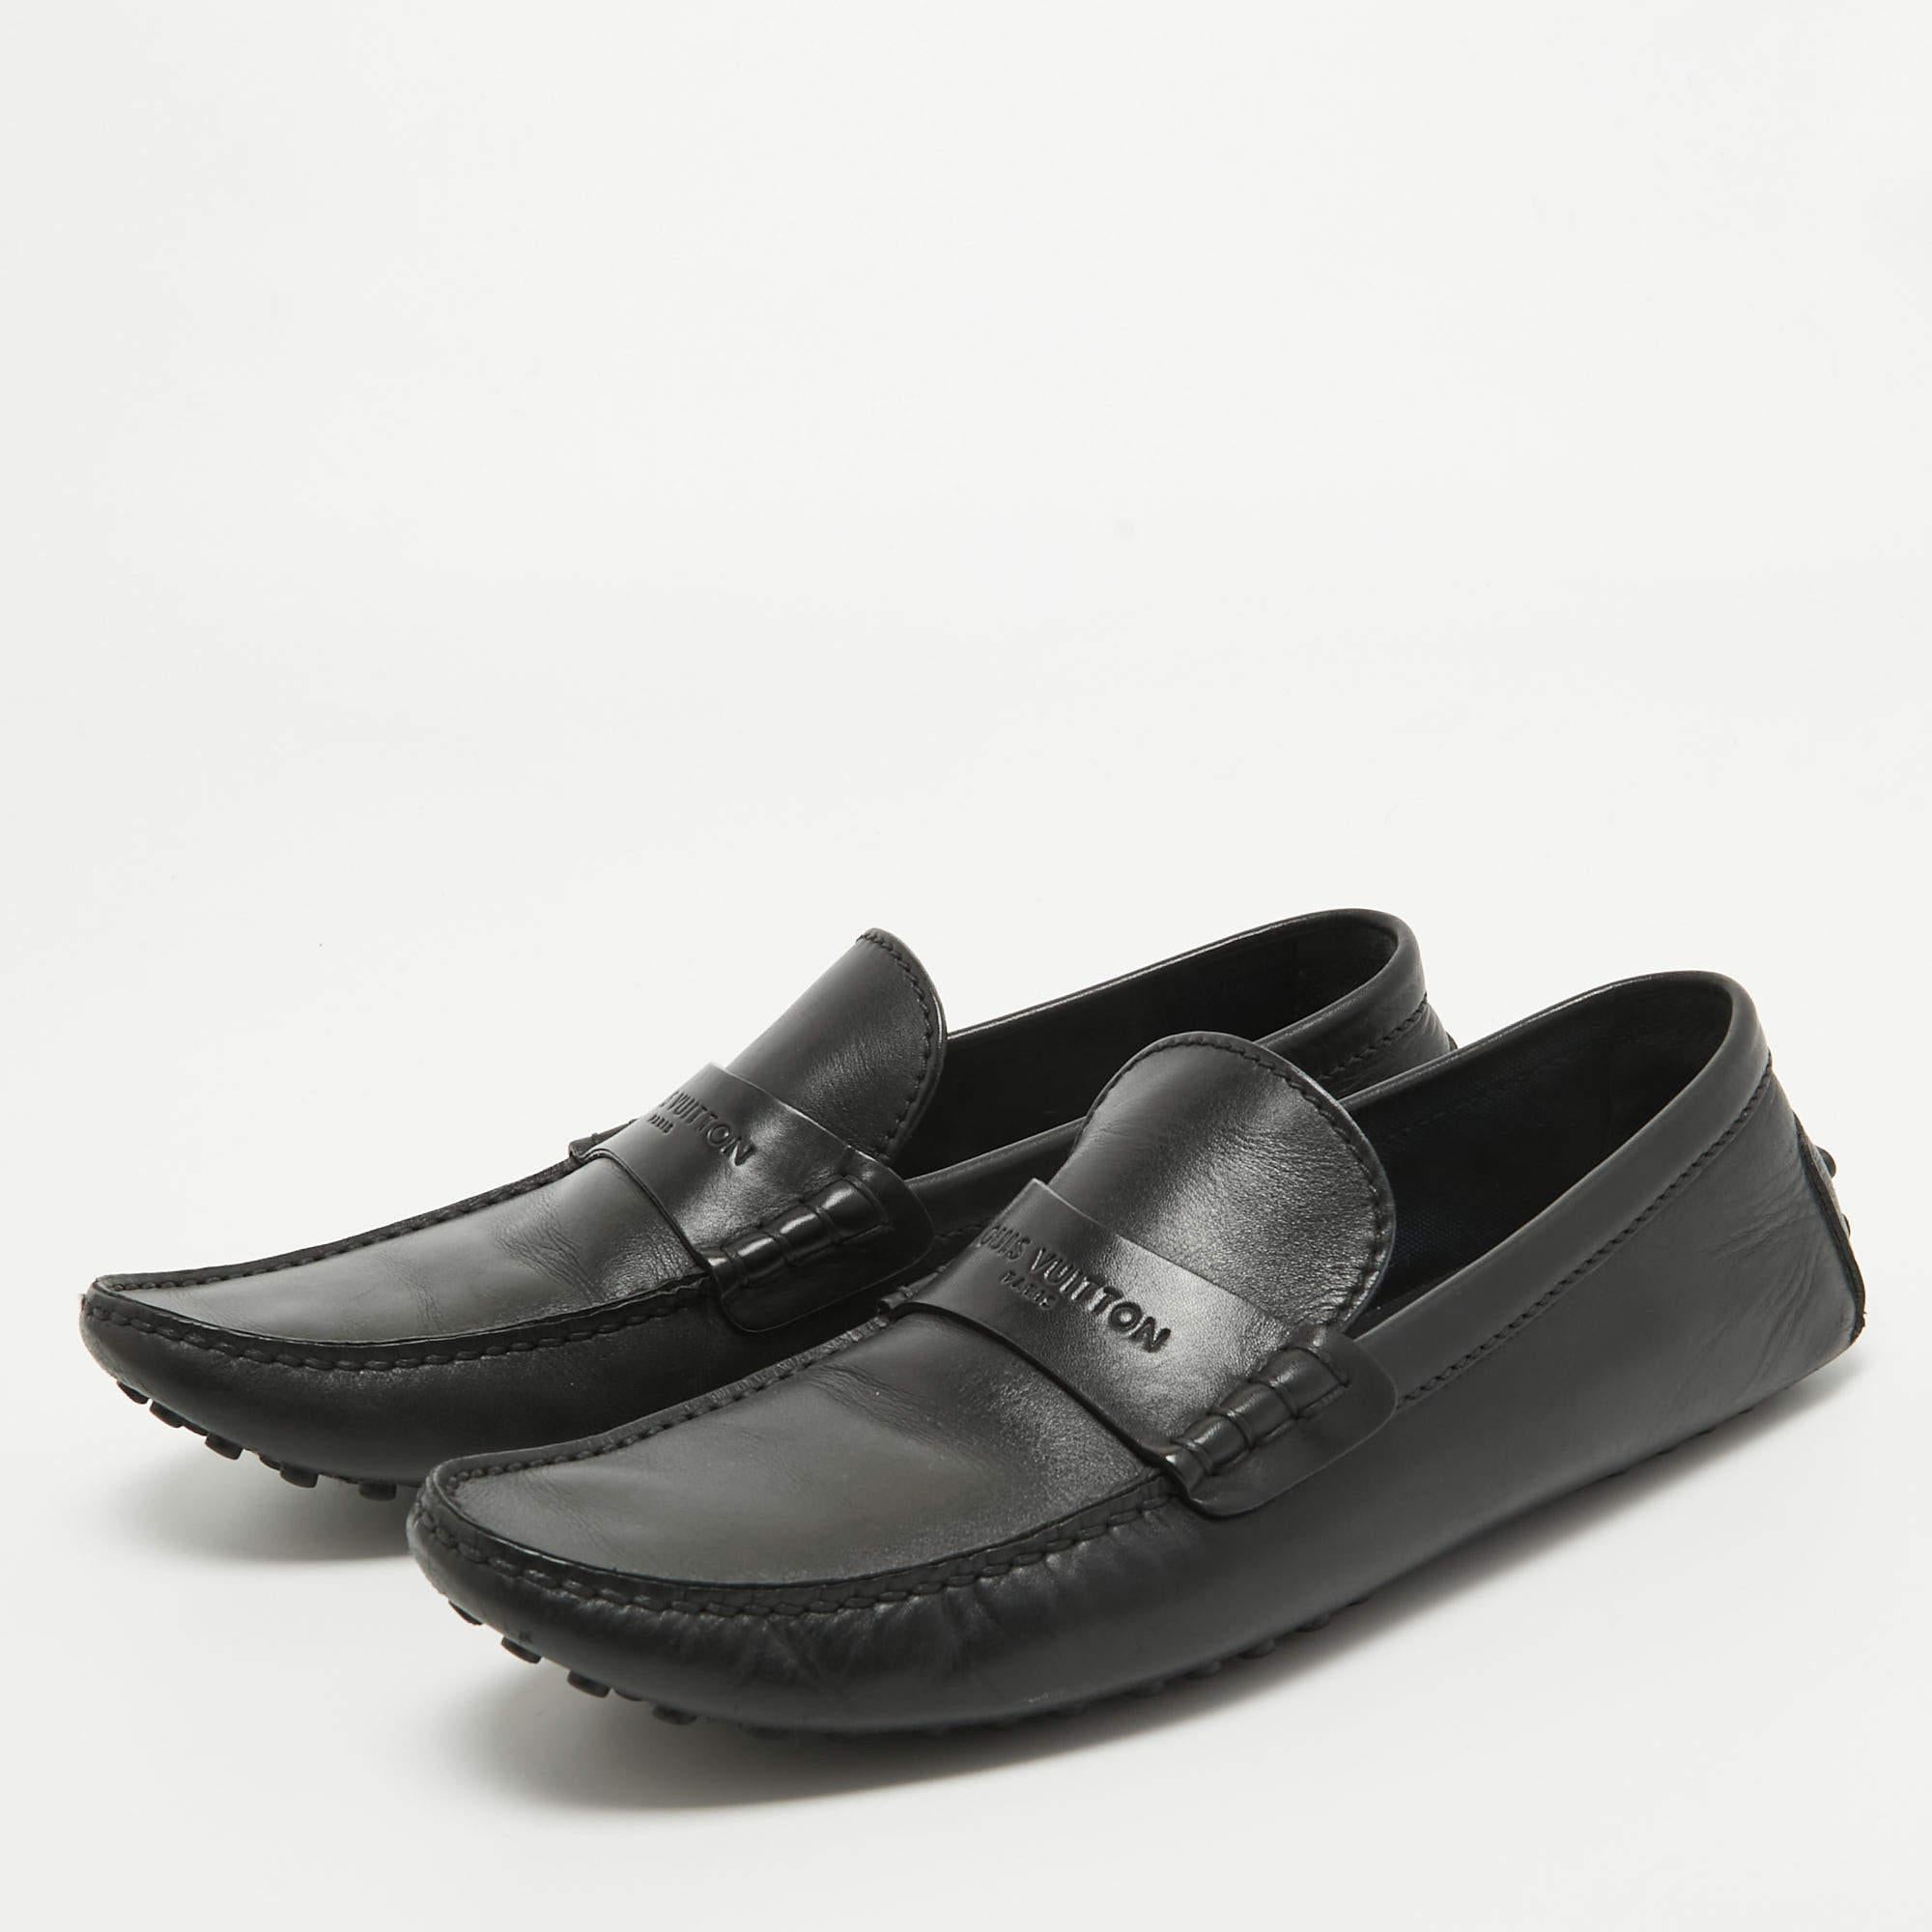 Louis Vuitton Black Leather Slip On Loafers Size 42.5 4